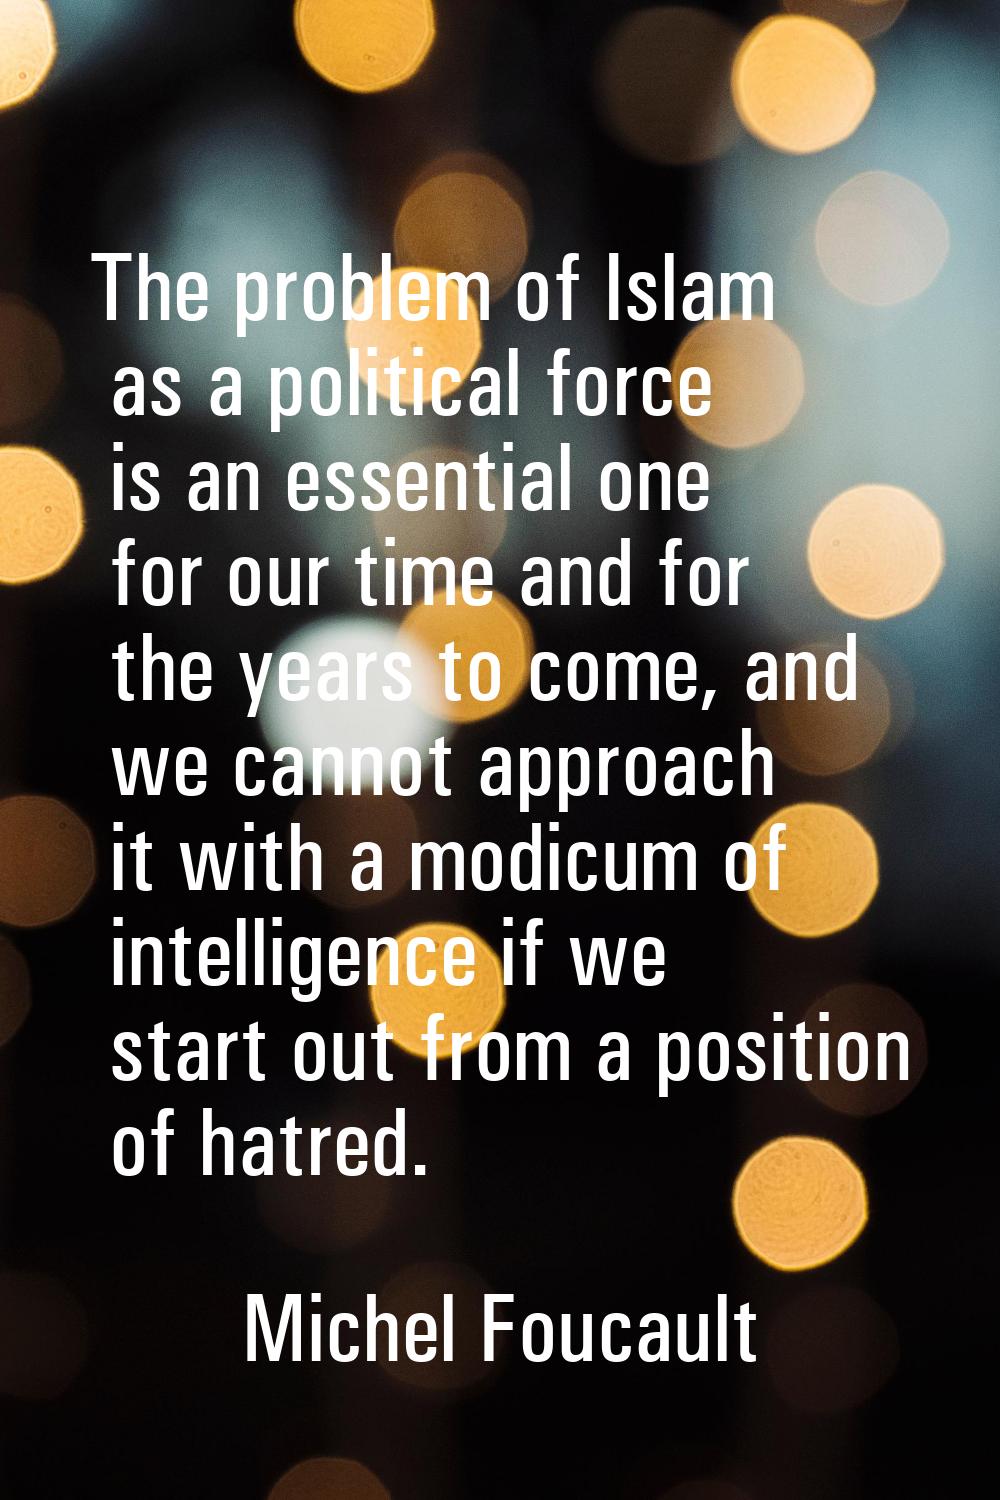 The problem of Islam as a political force is an essential one for our time and for the years to com